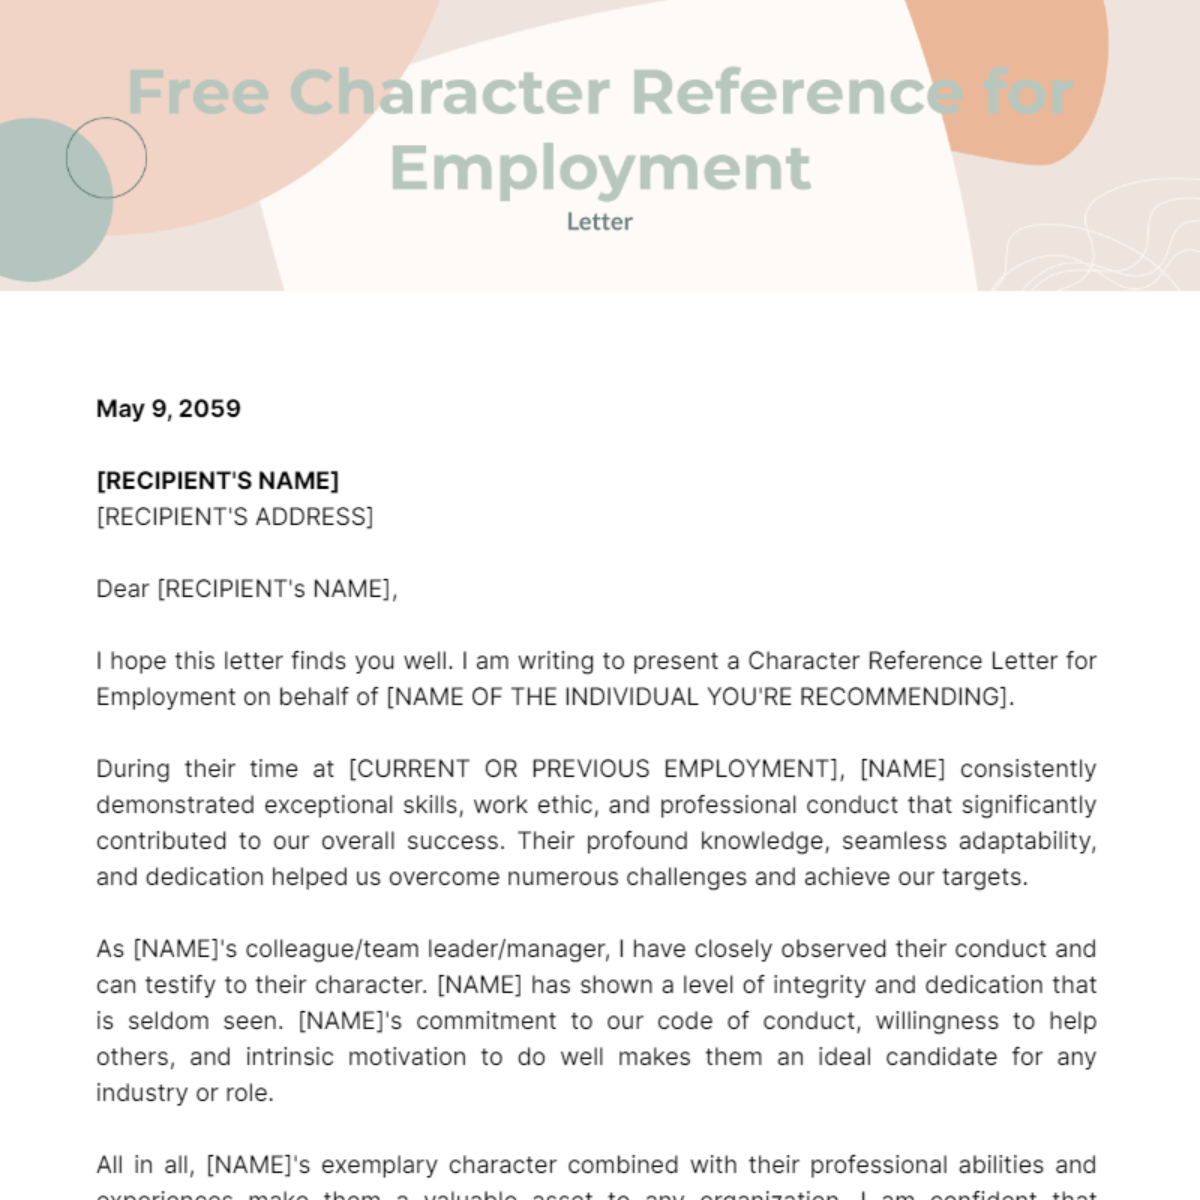 Character Reference Letter for Employment Template